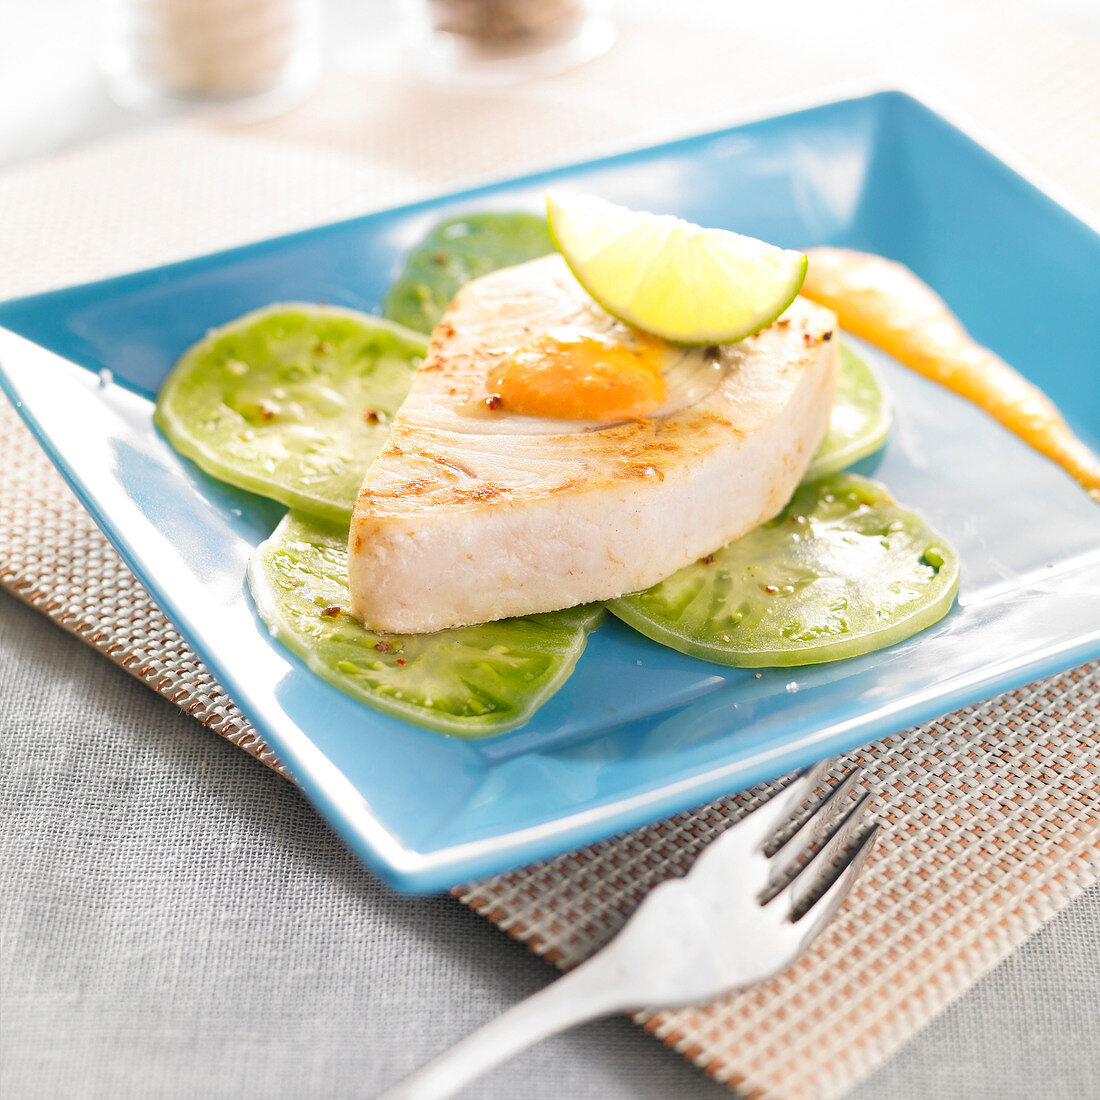 Pan-fried swordfish and thinly sliced stiped green tomatoes